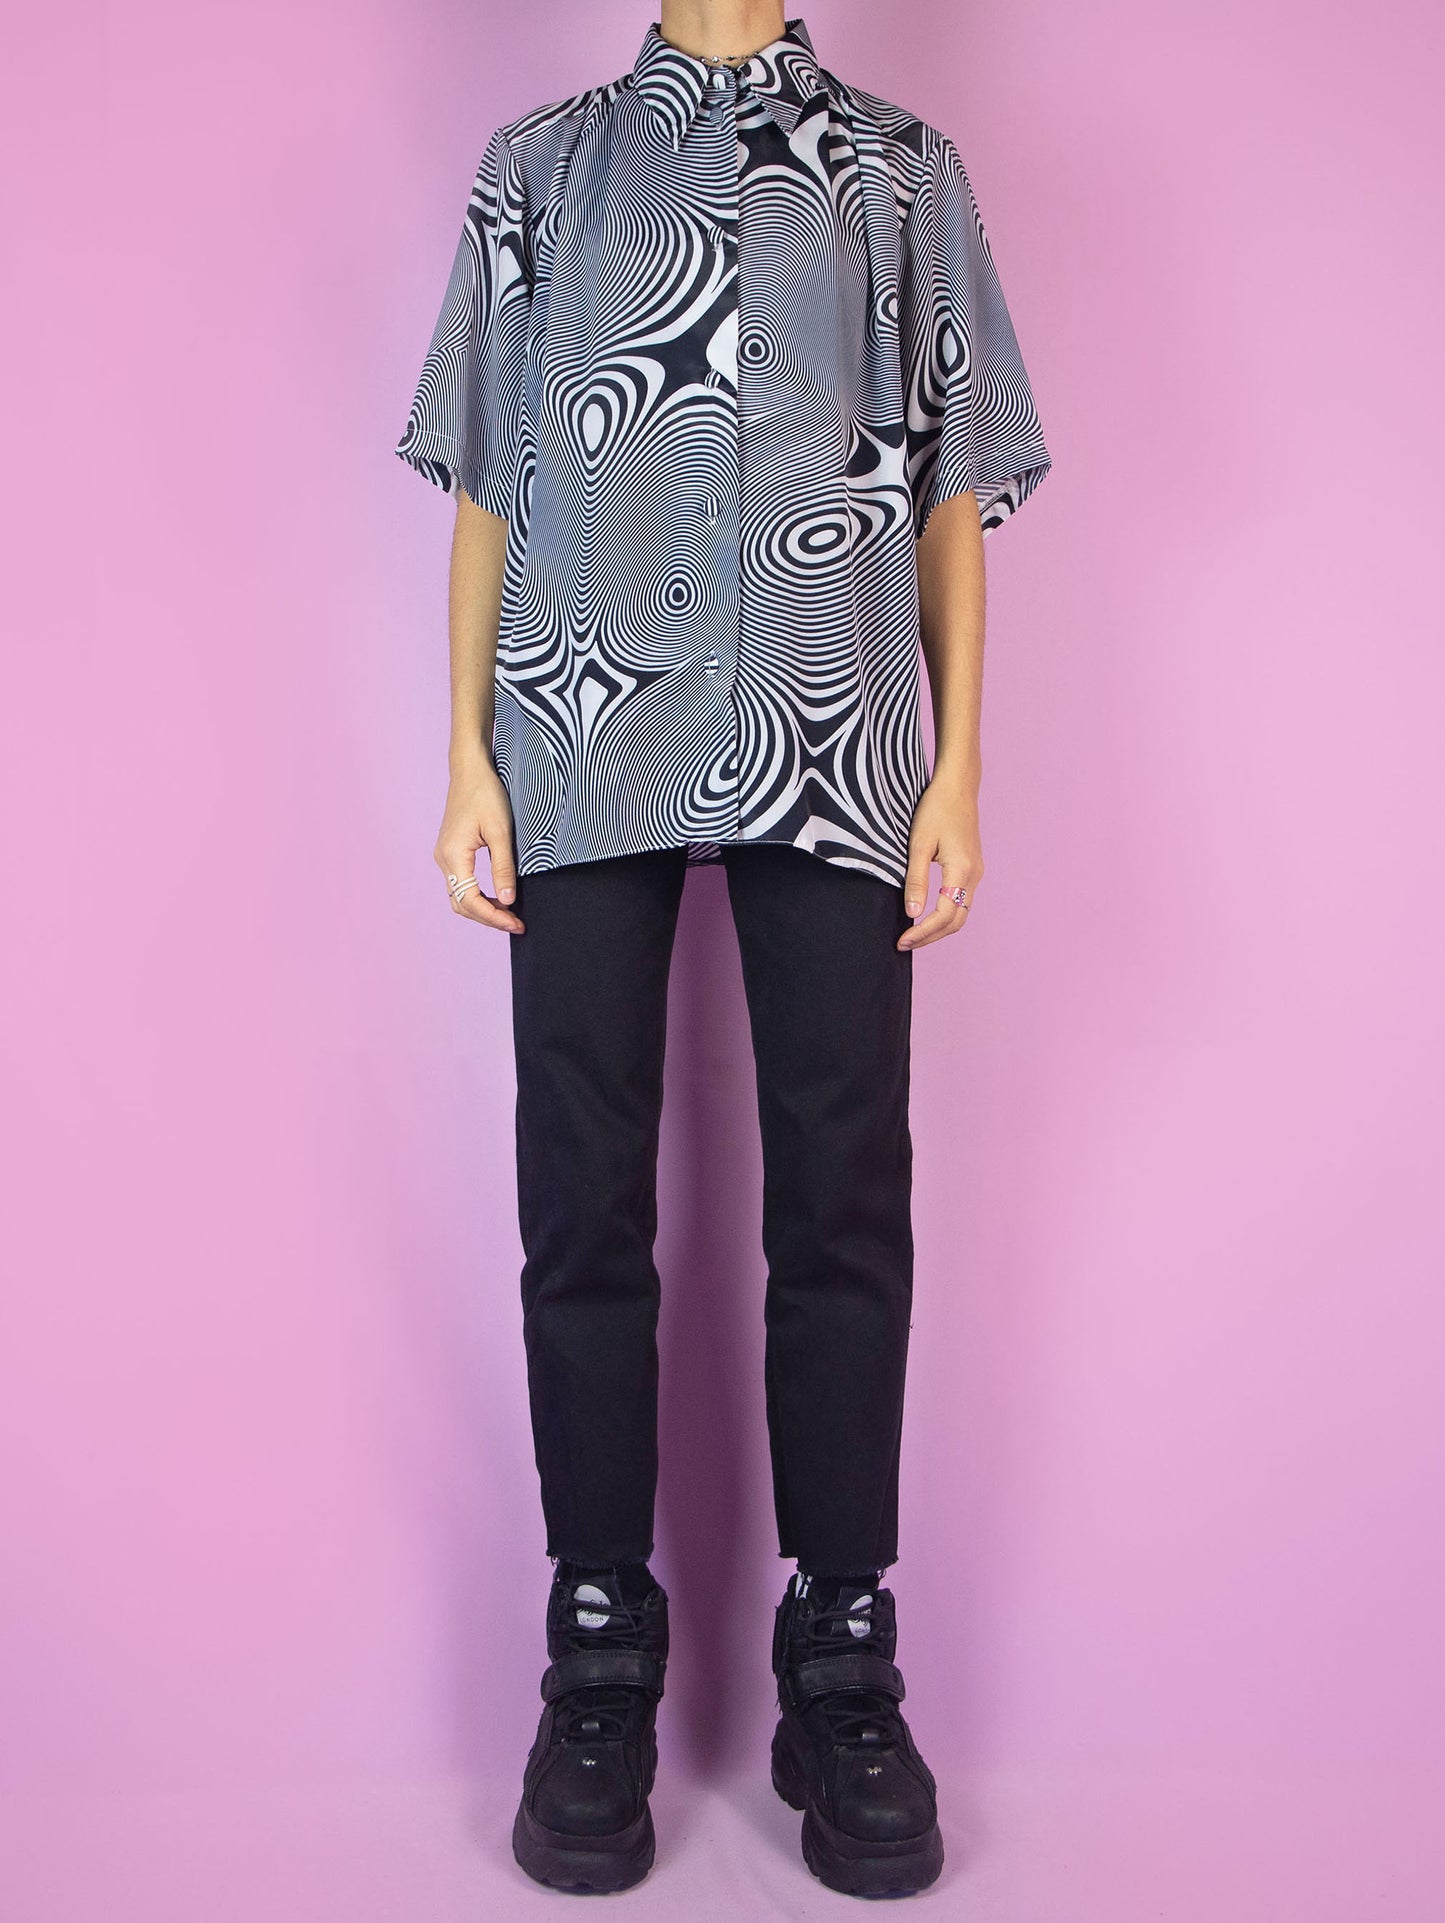 The Y2K Psychedelic Swirl Graphic Shirt is a vintage black and white short-sleeved blouse with a collar and buttons. Cyber grunge 2000s festival rave summer party shirt.